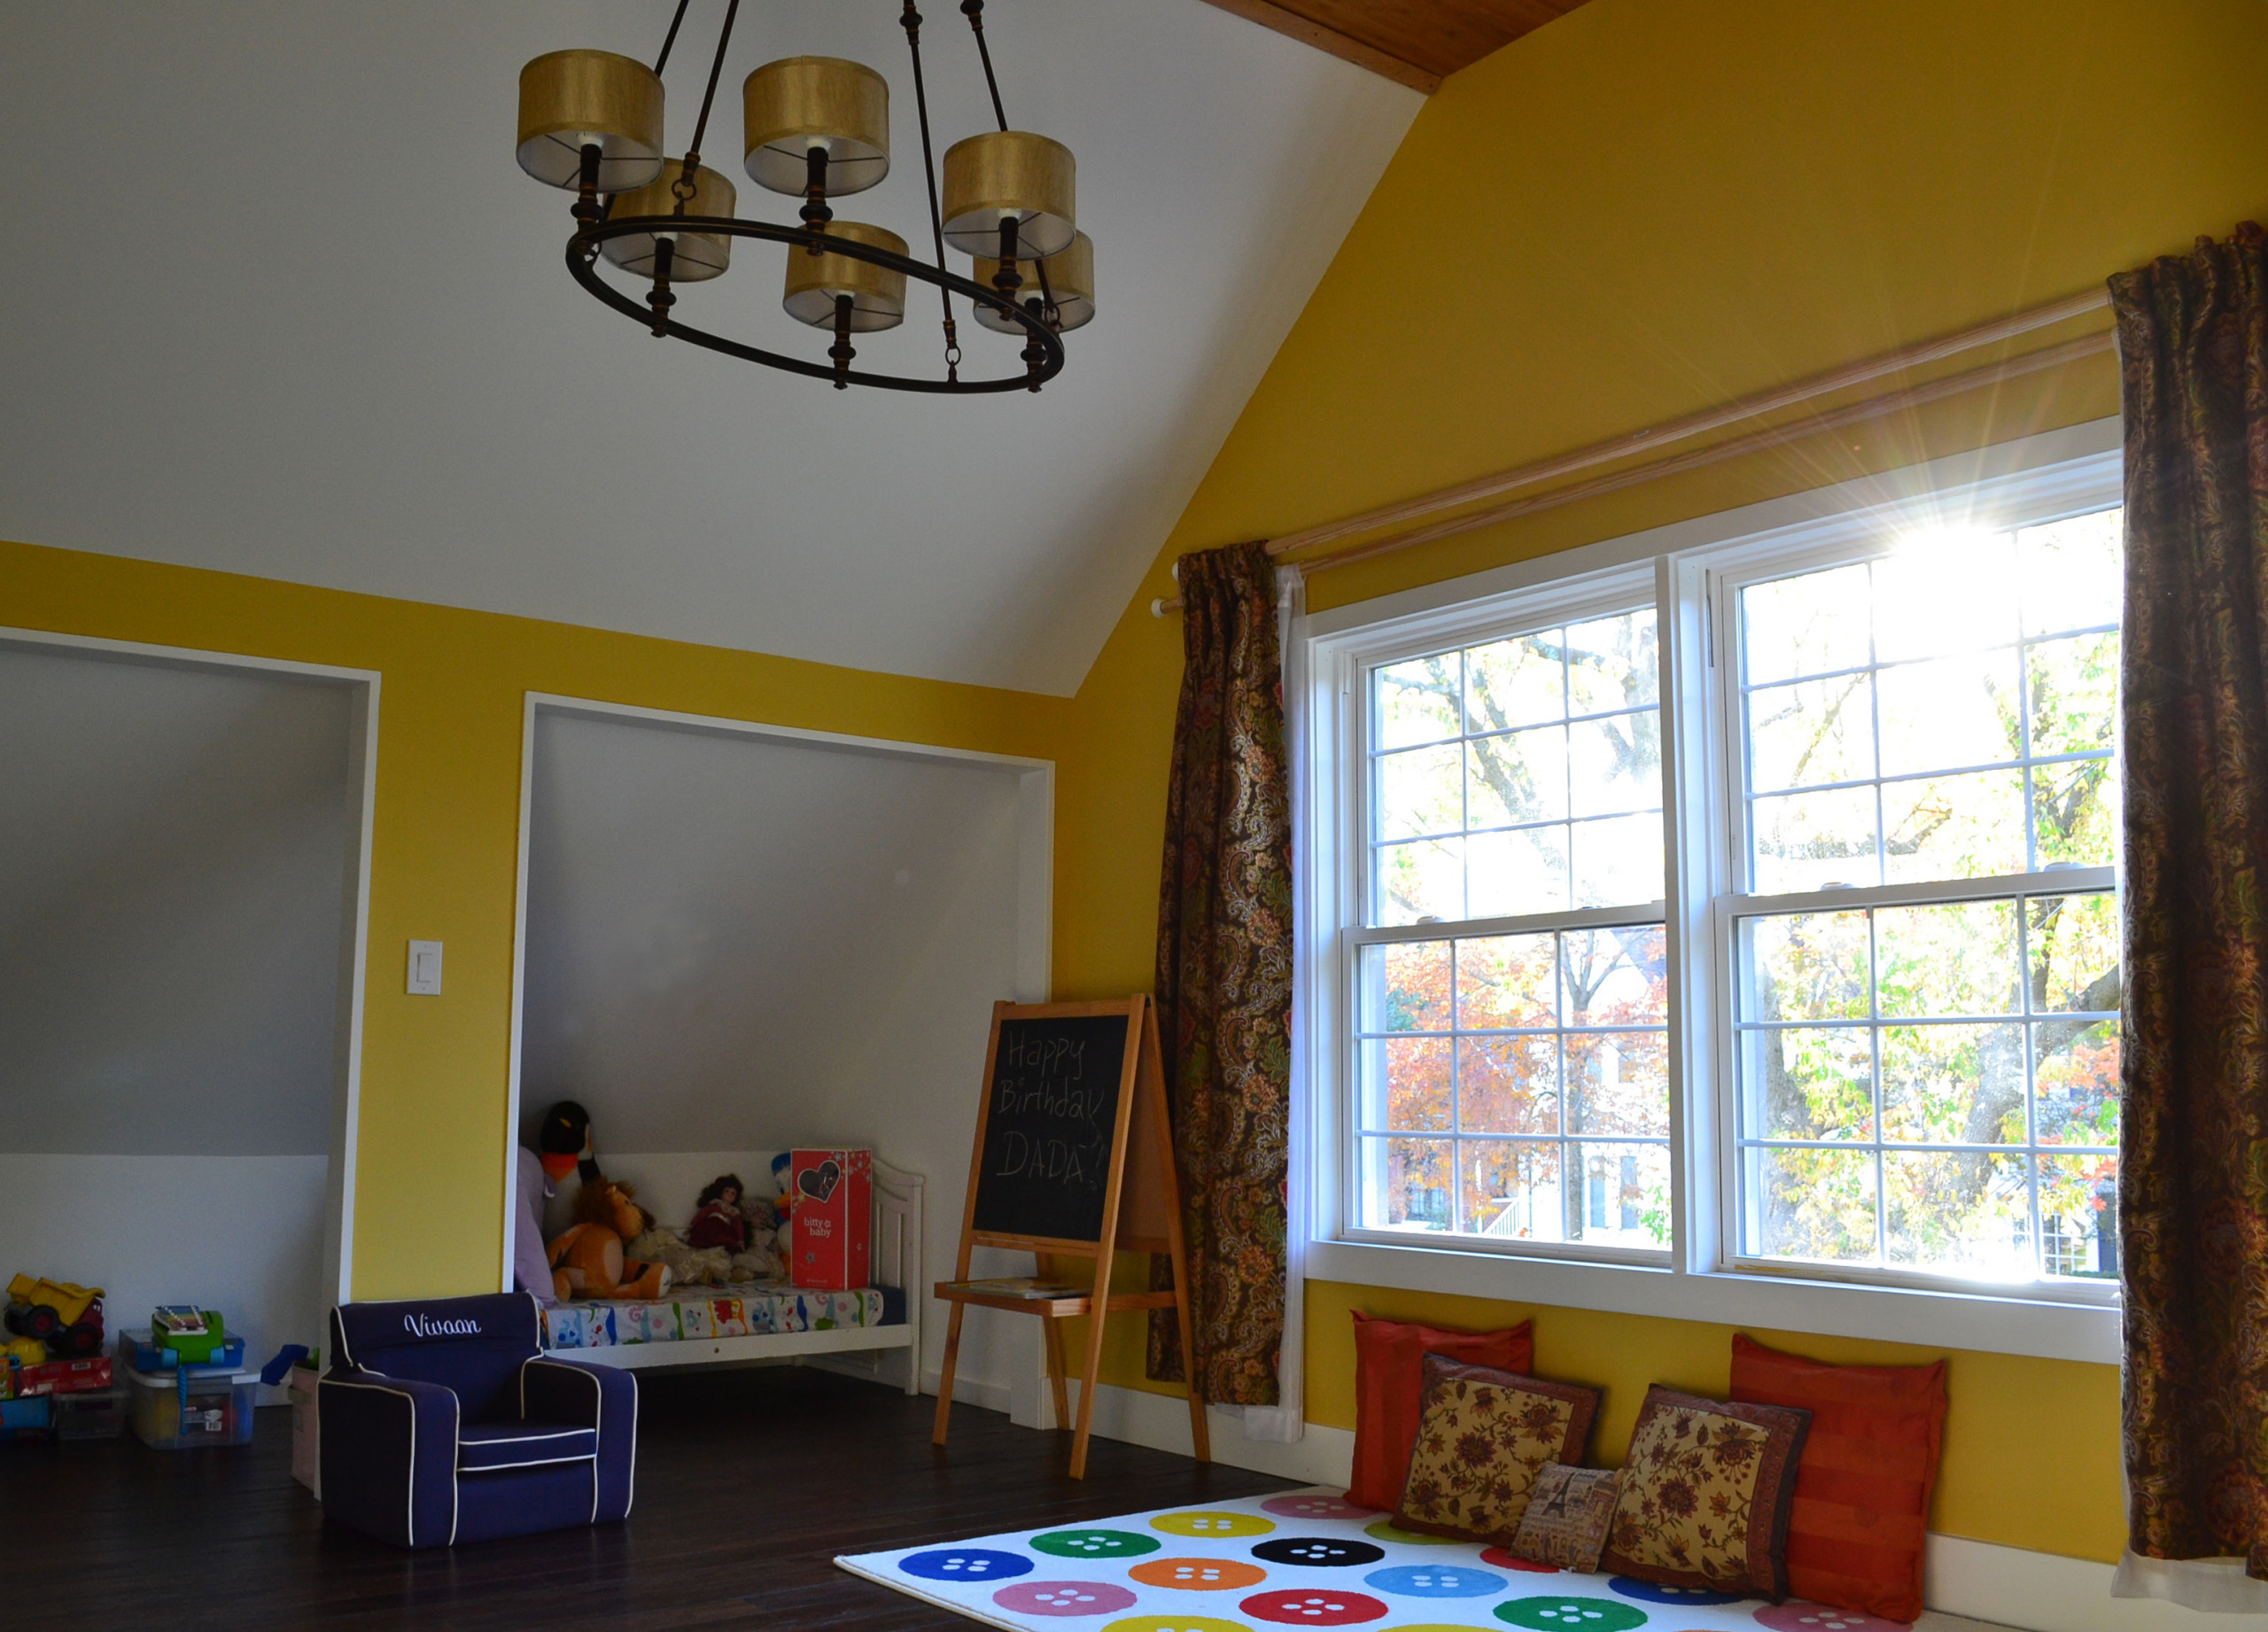 Whole house remodeling and addition - 2nd Floor Playroom